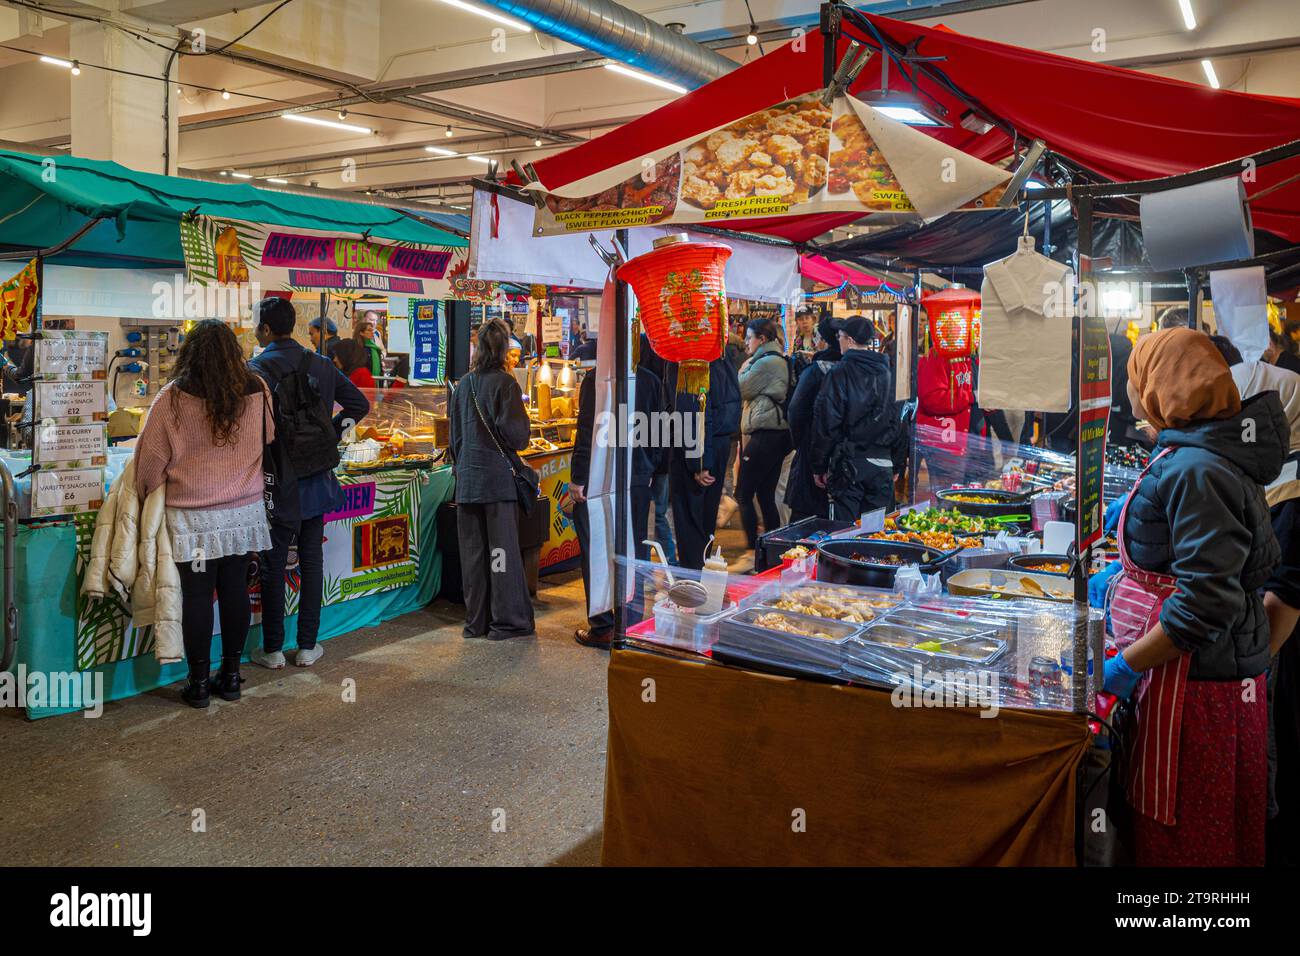 Upmarket Food Market London. The Upmarket Food Hall on Brick Lane in the former Truman Brewery, serving a large variety of international street food. Stock Photo